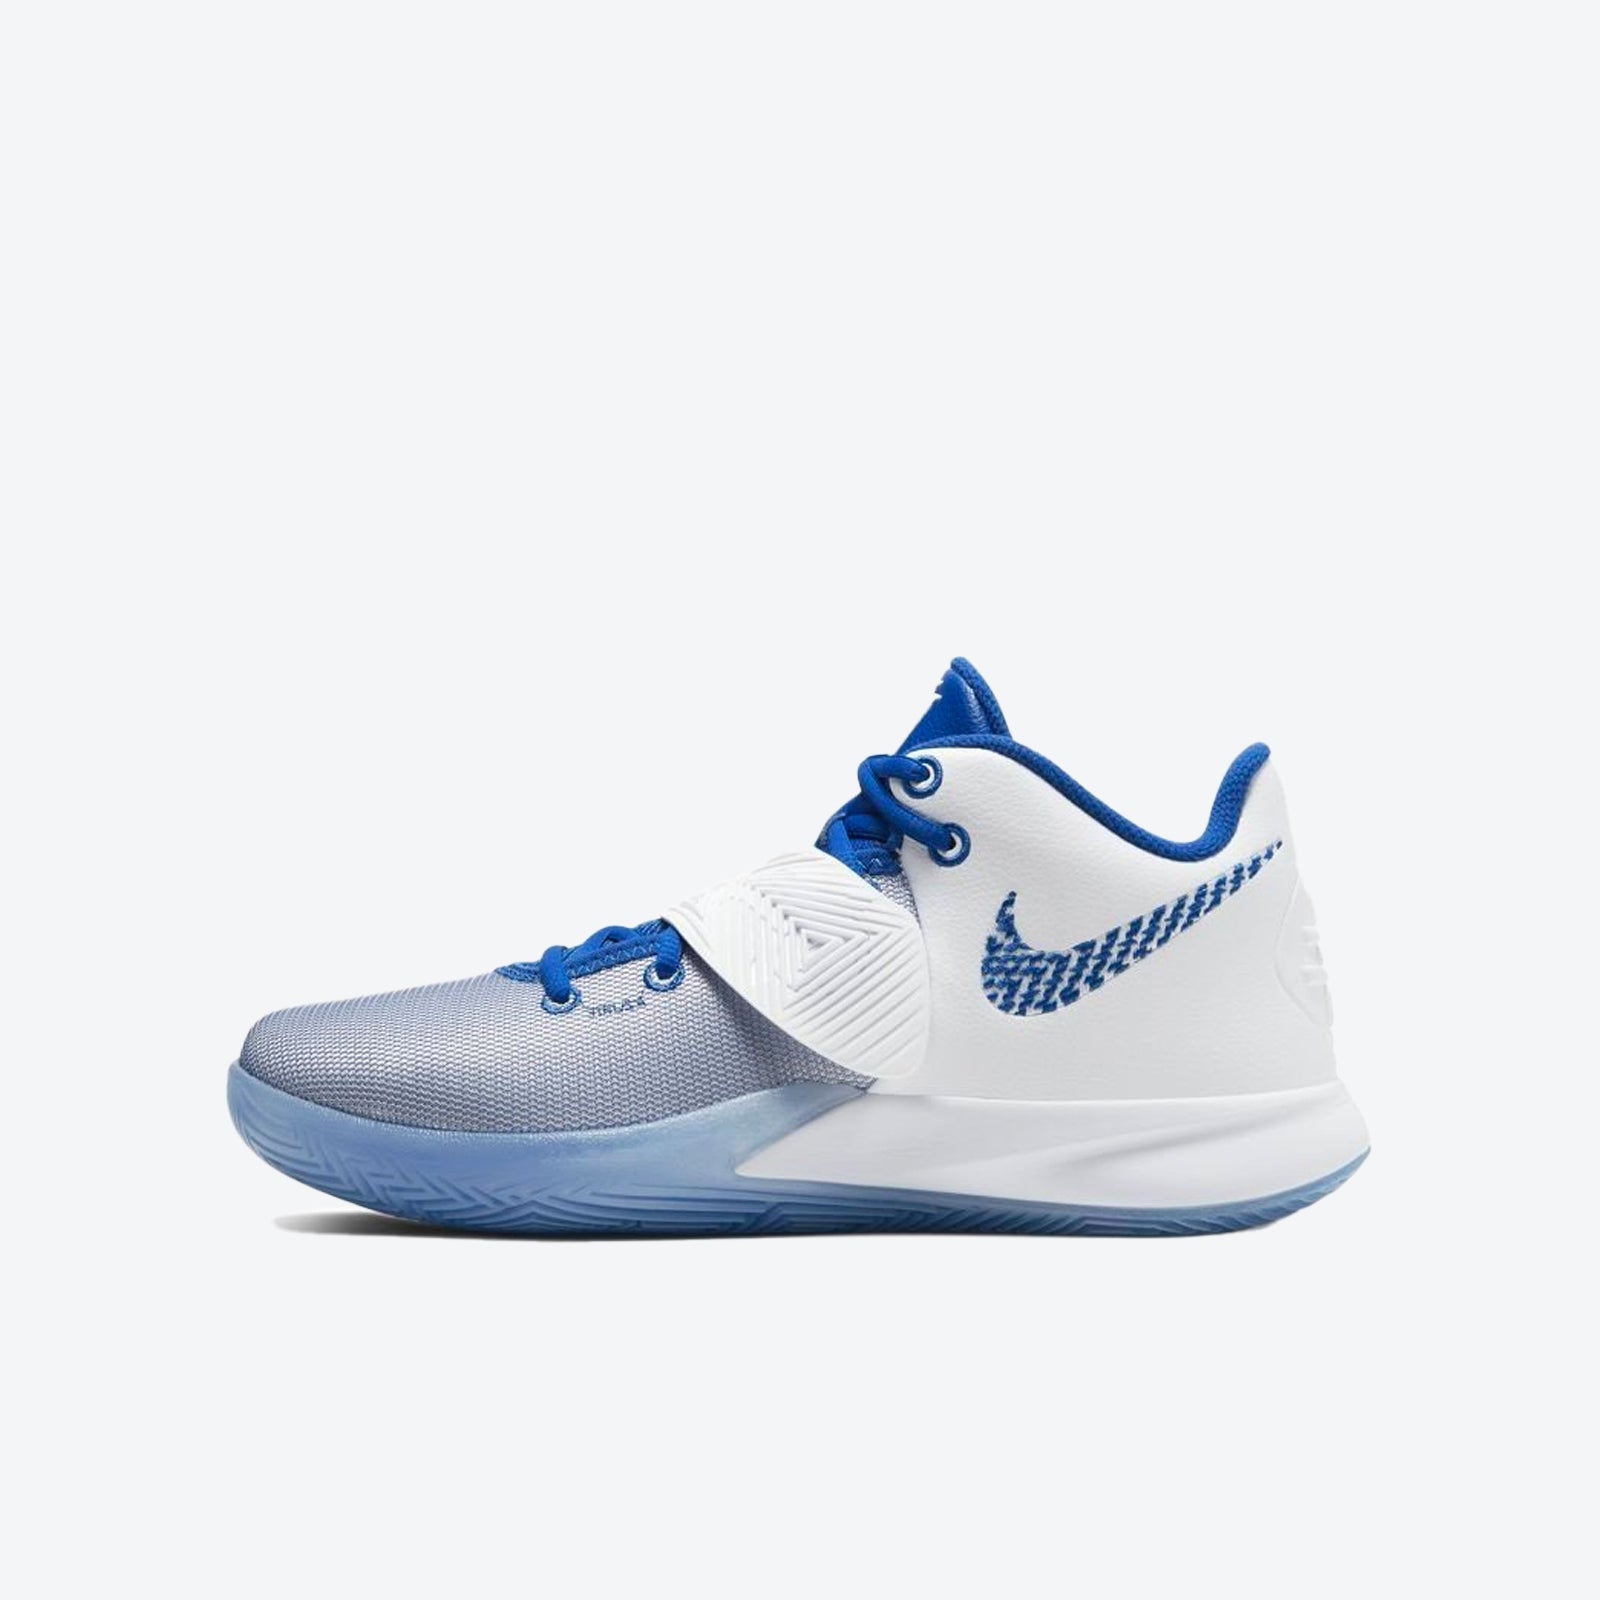 kyrie irving shoes flytrap white